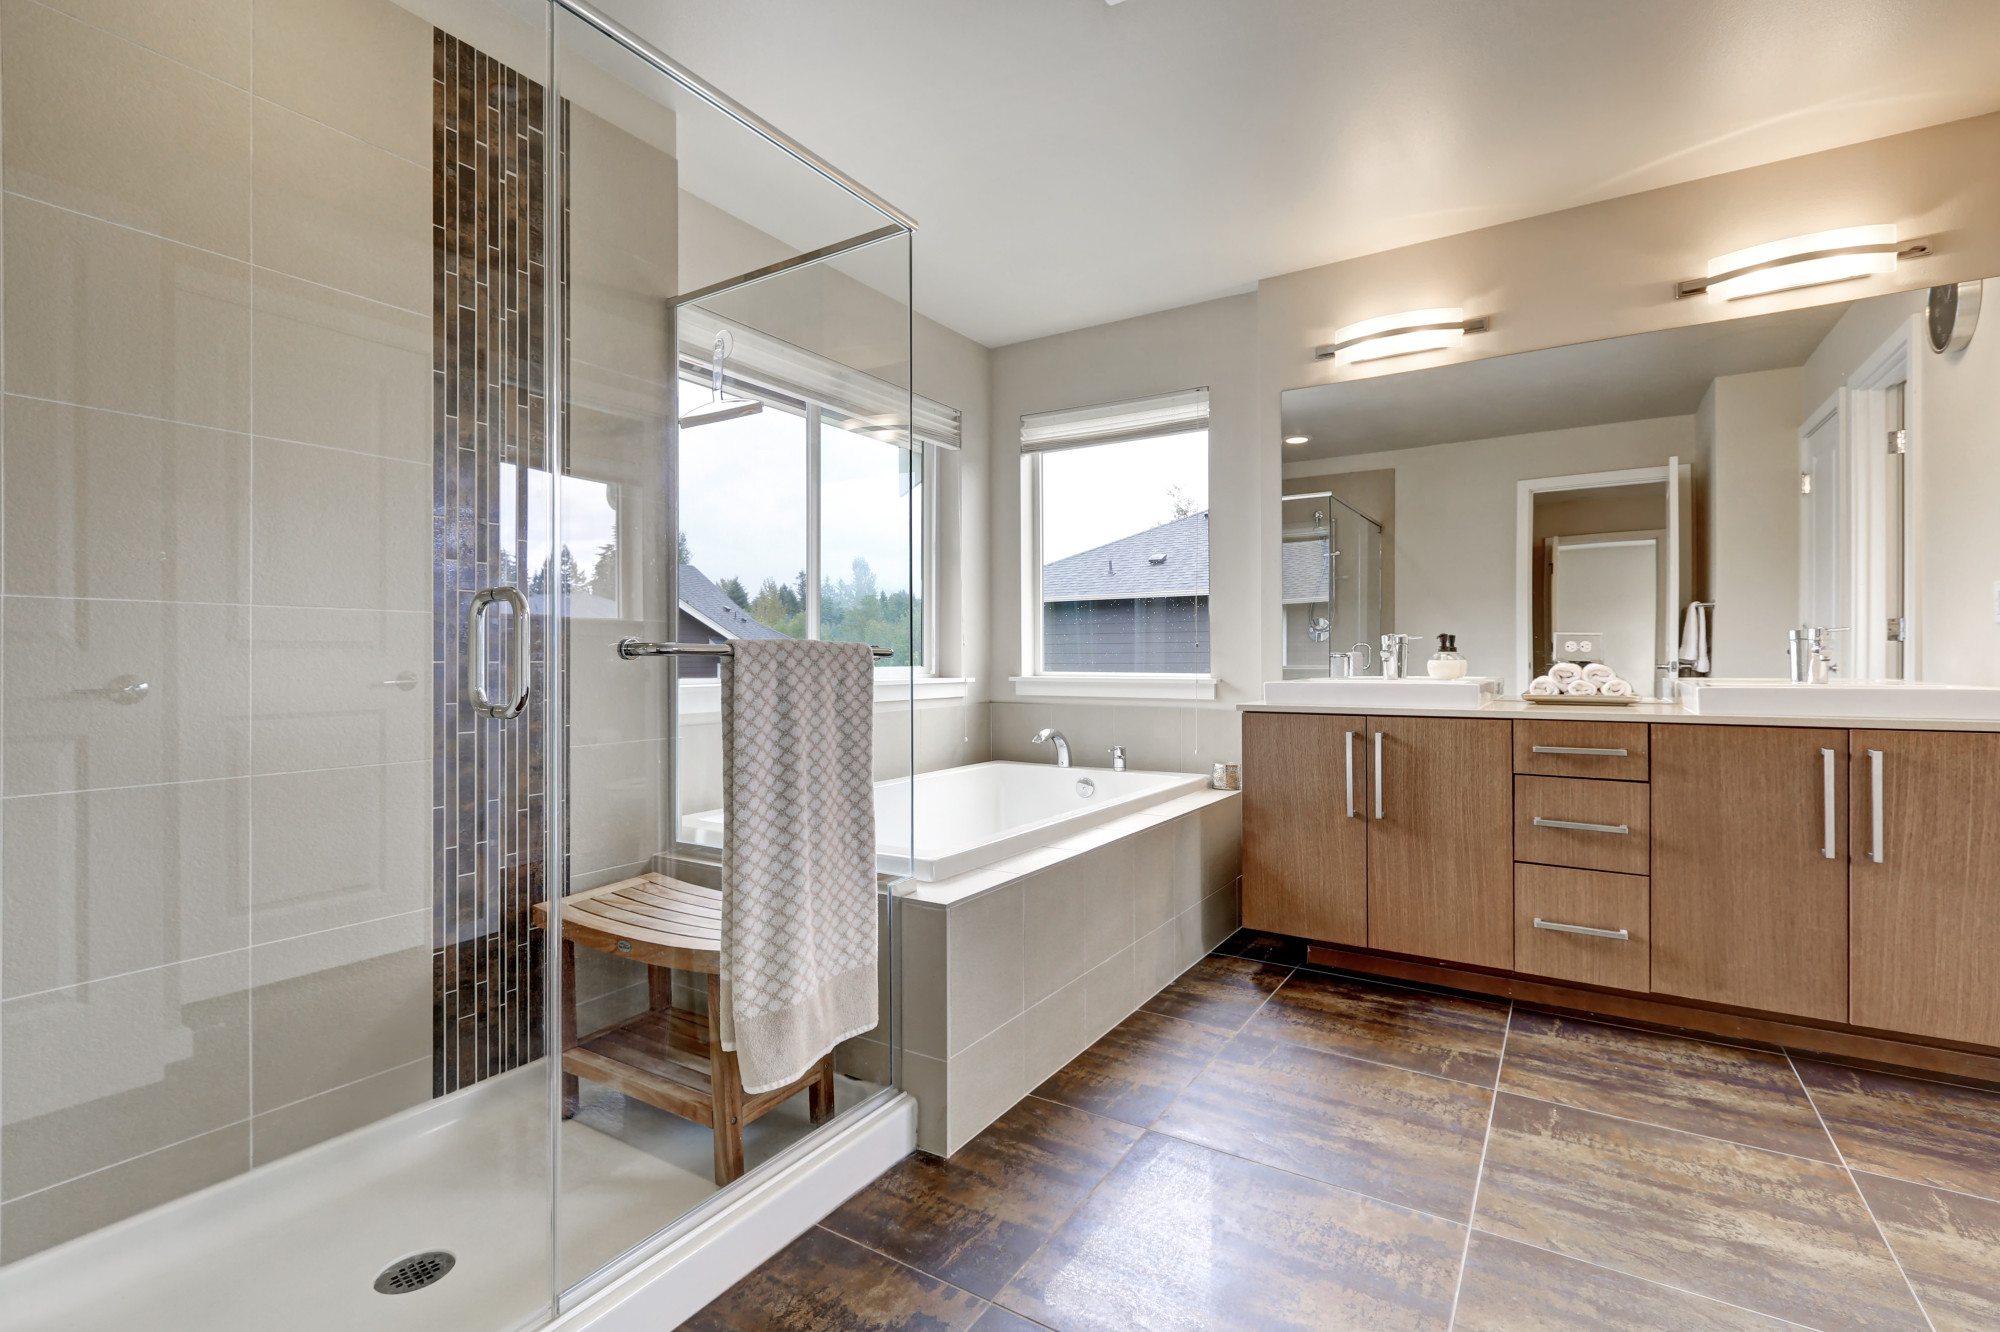 The Benefits of Installing a New Walk-In Tub or Shower in Prescott